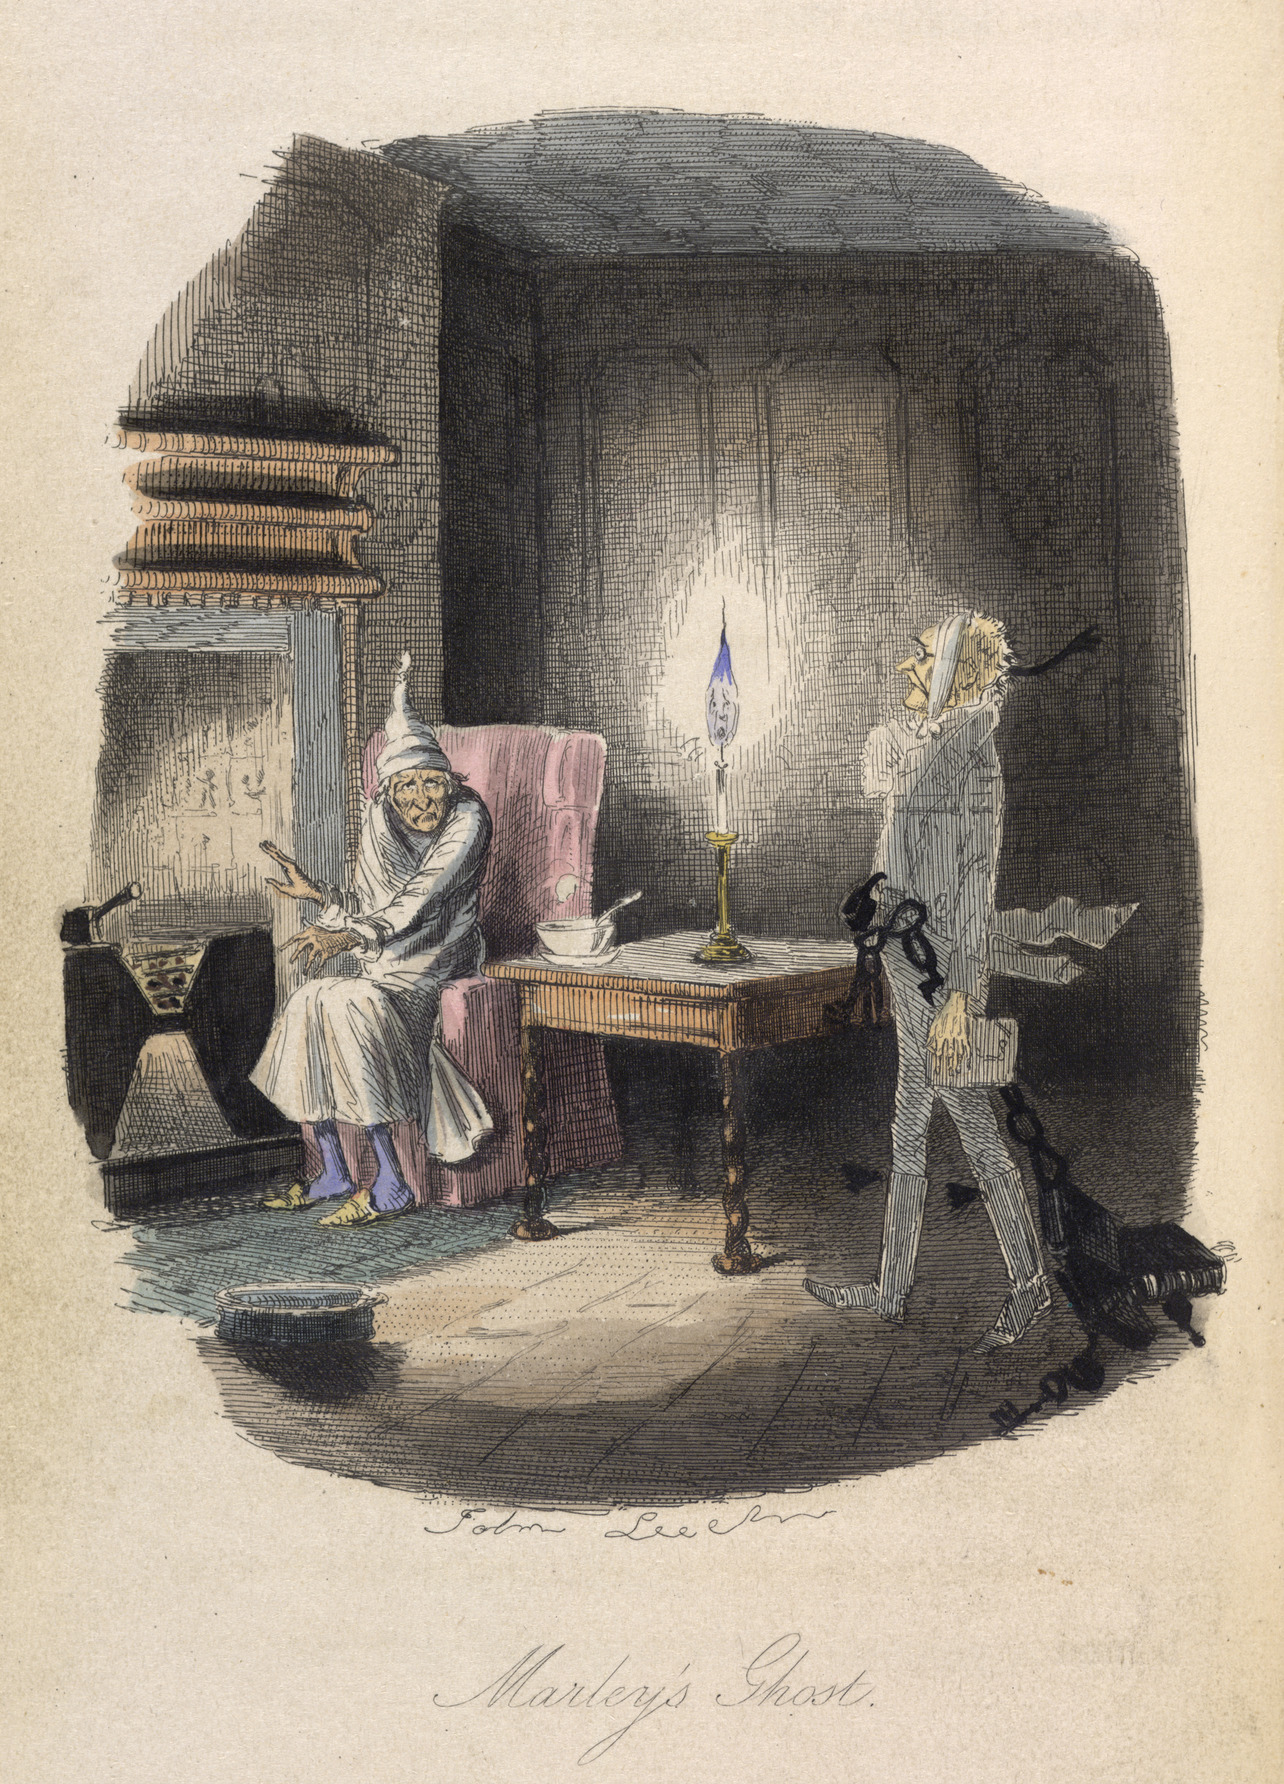 Colour illustration from 'A Christmas Carol in prose. Being a Ghost-story of Christmas', by Charles Dickens, With illustrations by John Leech.